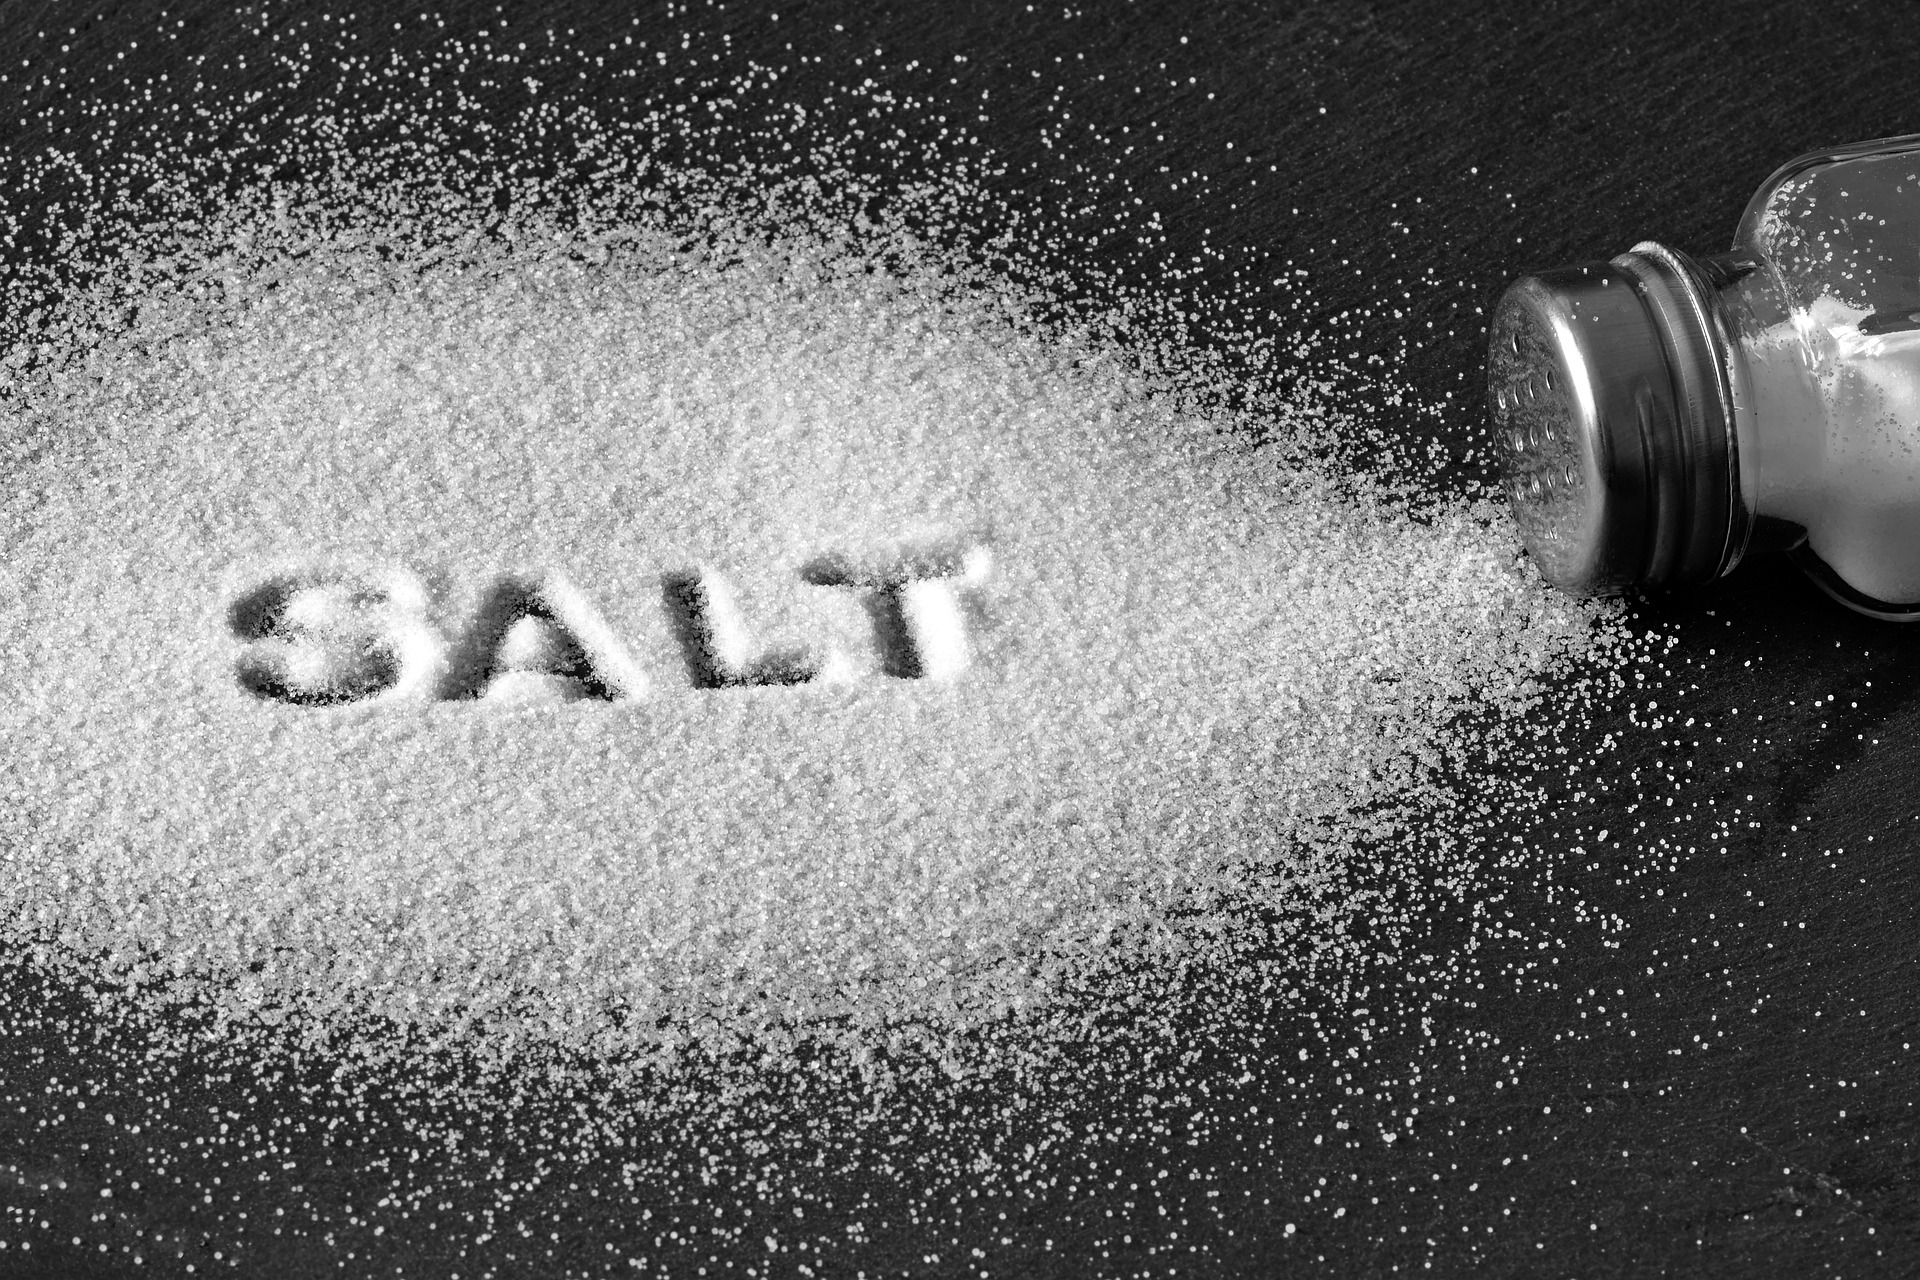 In the U.S., 90% of children and adults consume too much sodium, according to the CDC. (Pixabay photo)